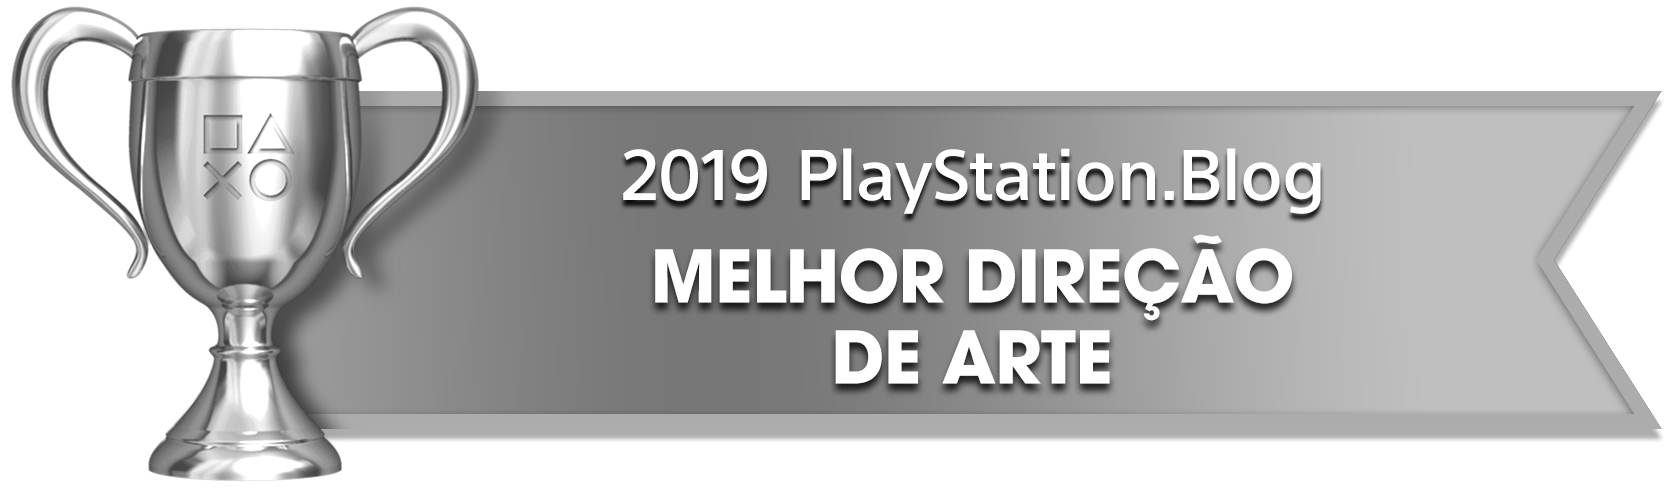 PS Blog Game of the Year 2019 - Best Art Direction - 3 - Silver